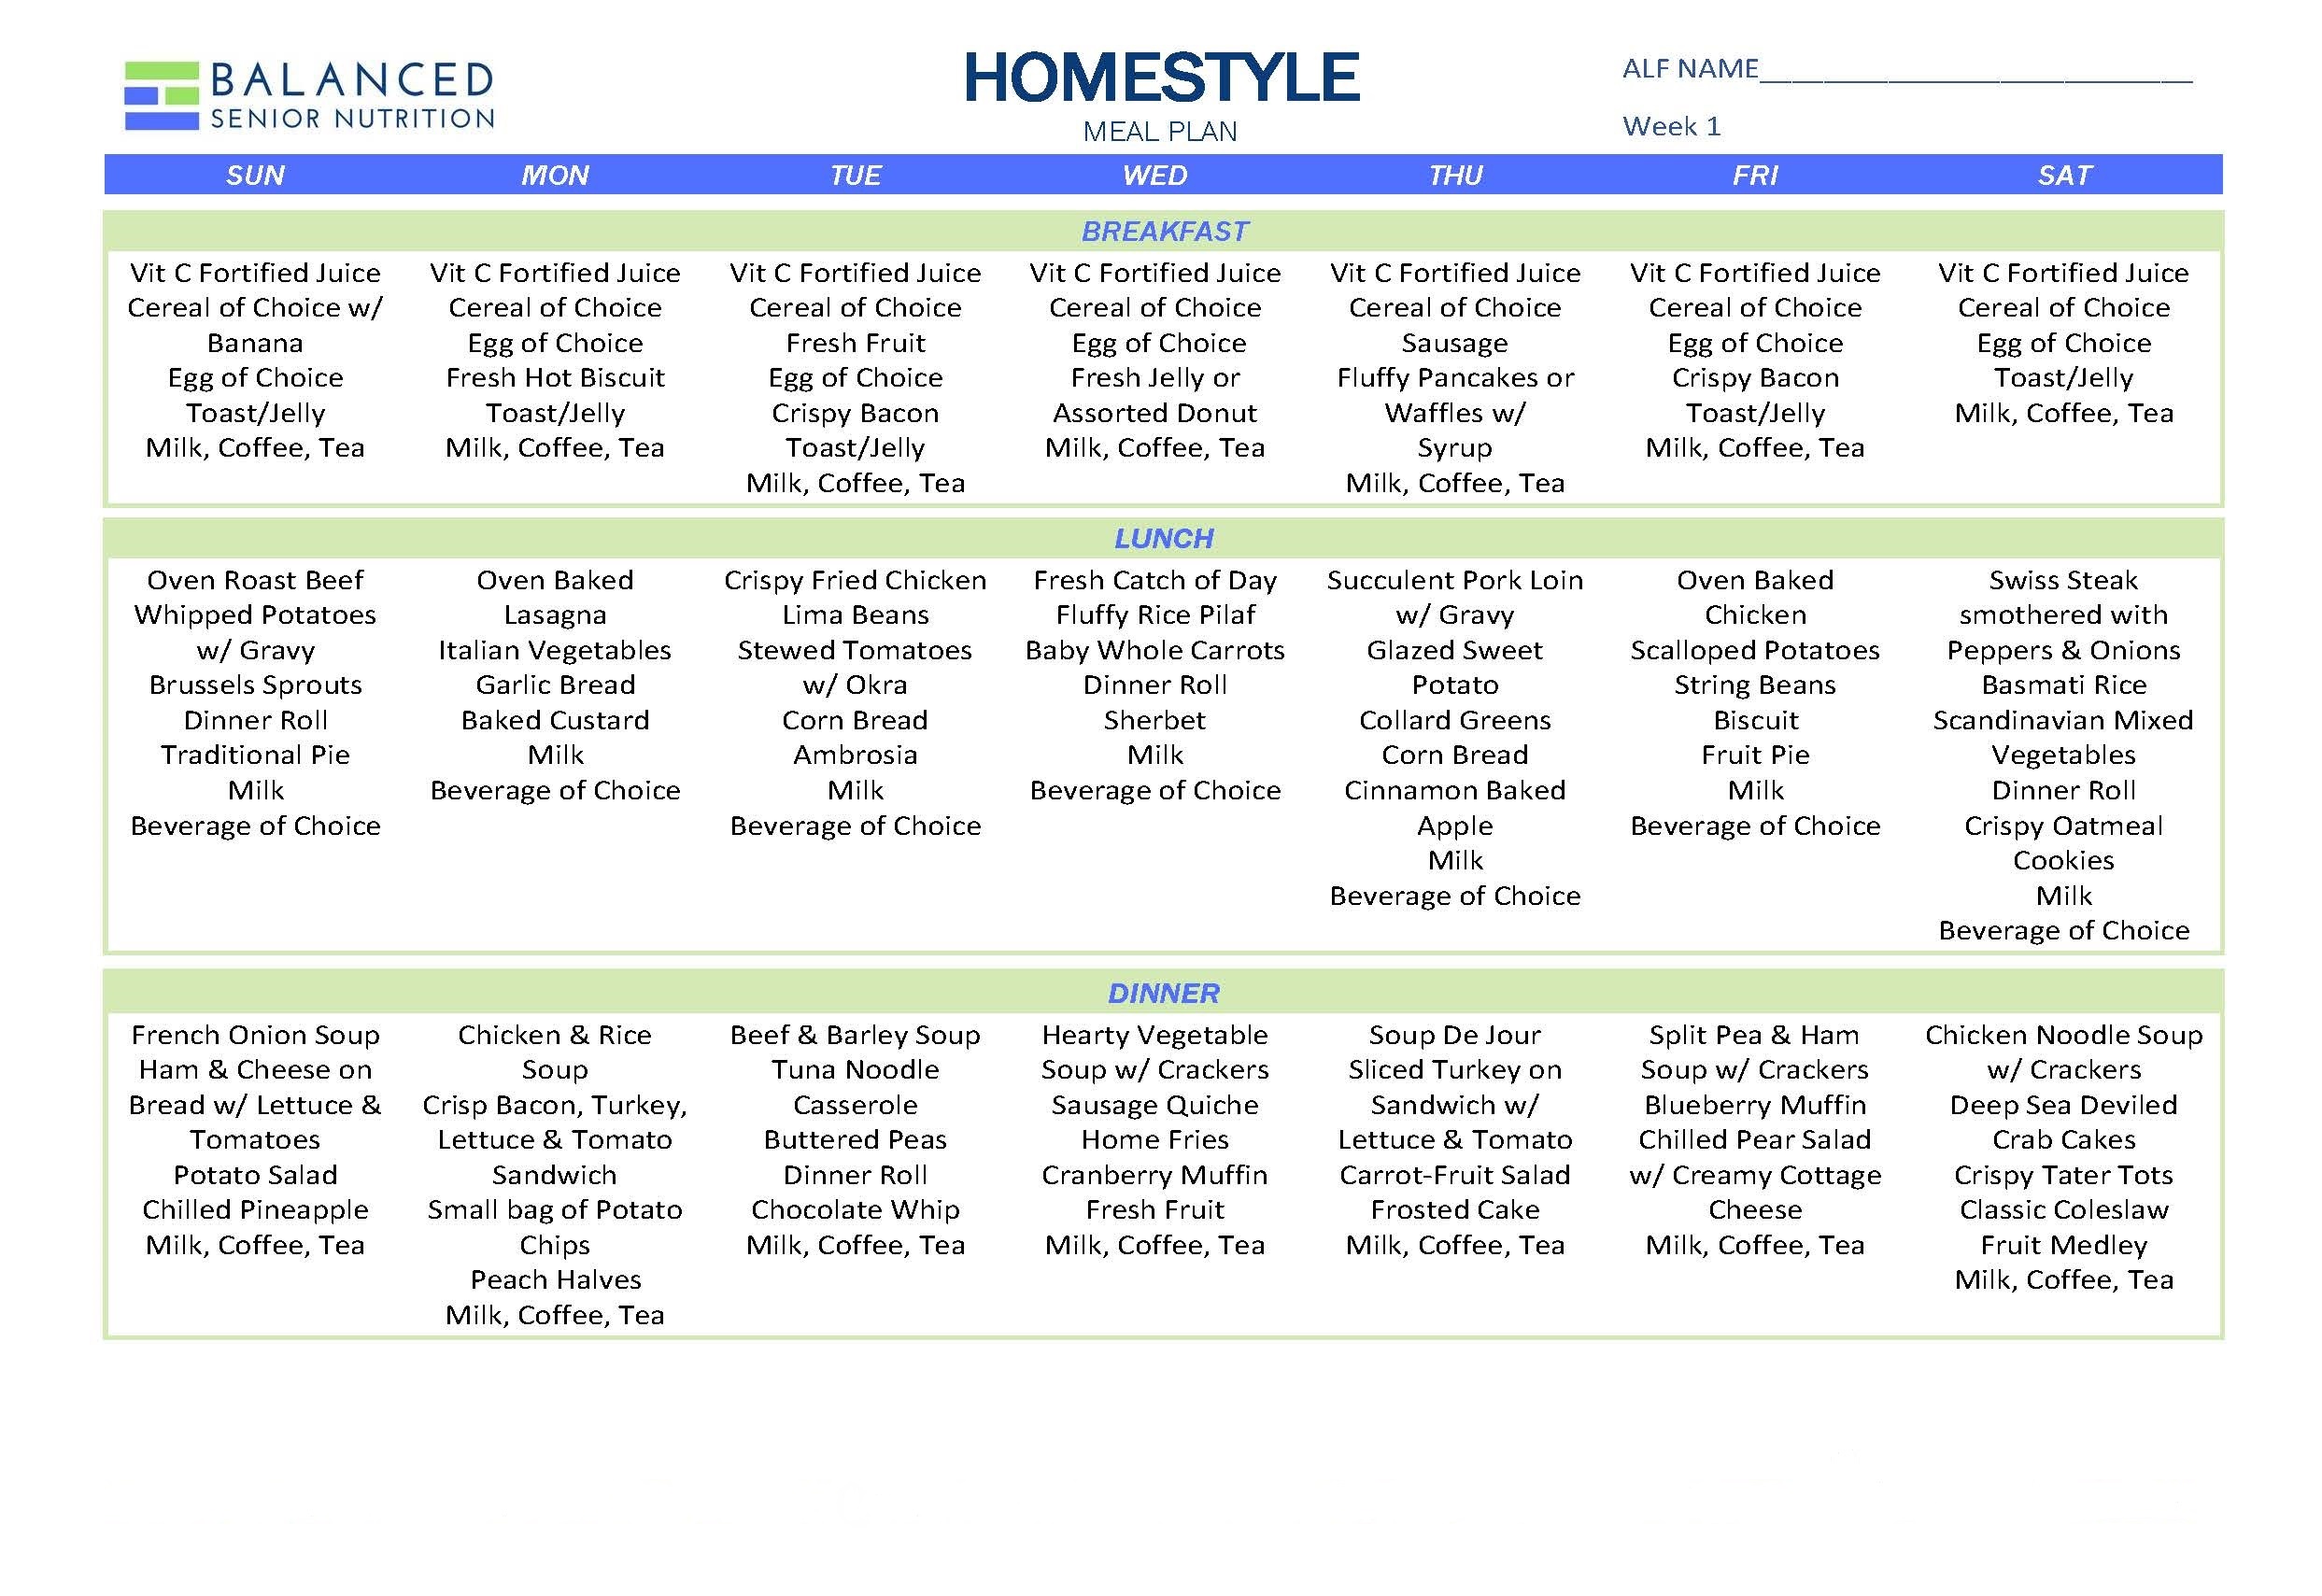 Home Style Meal Plan